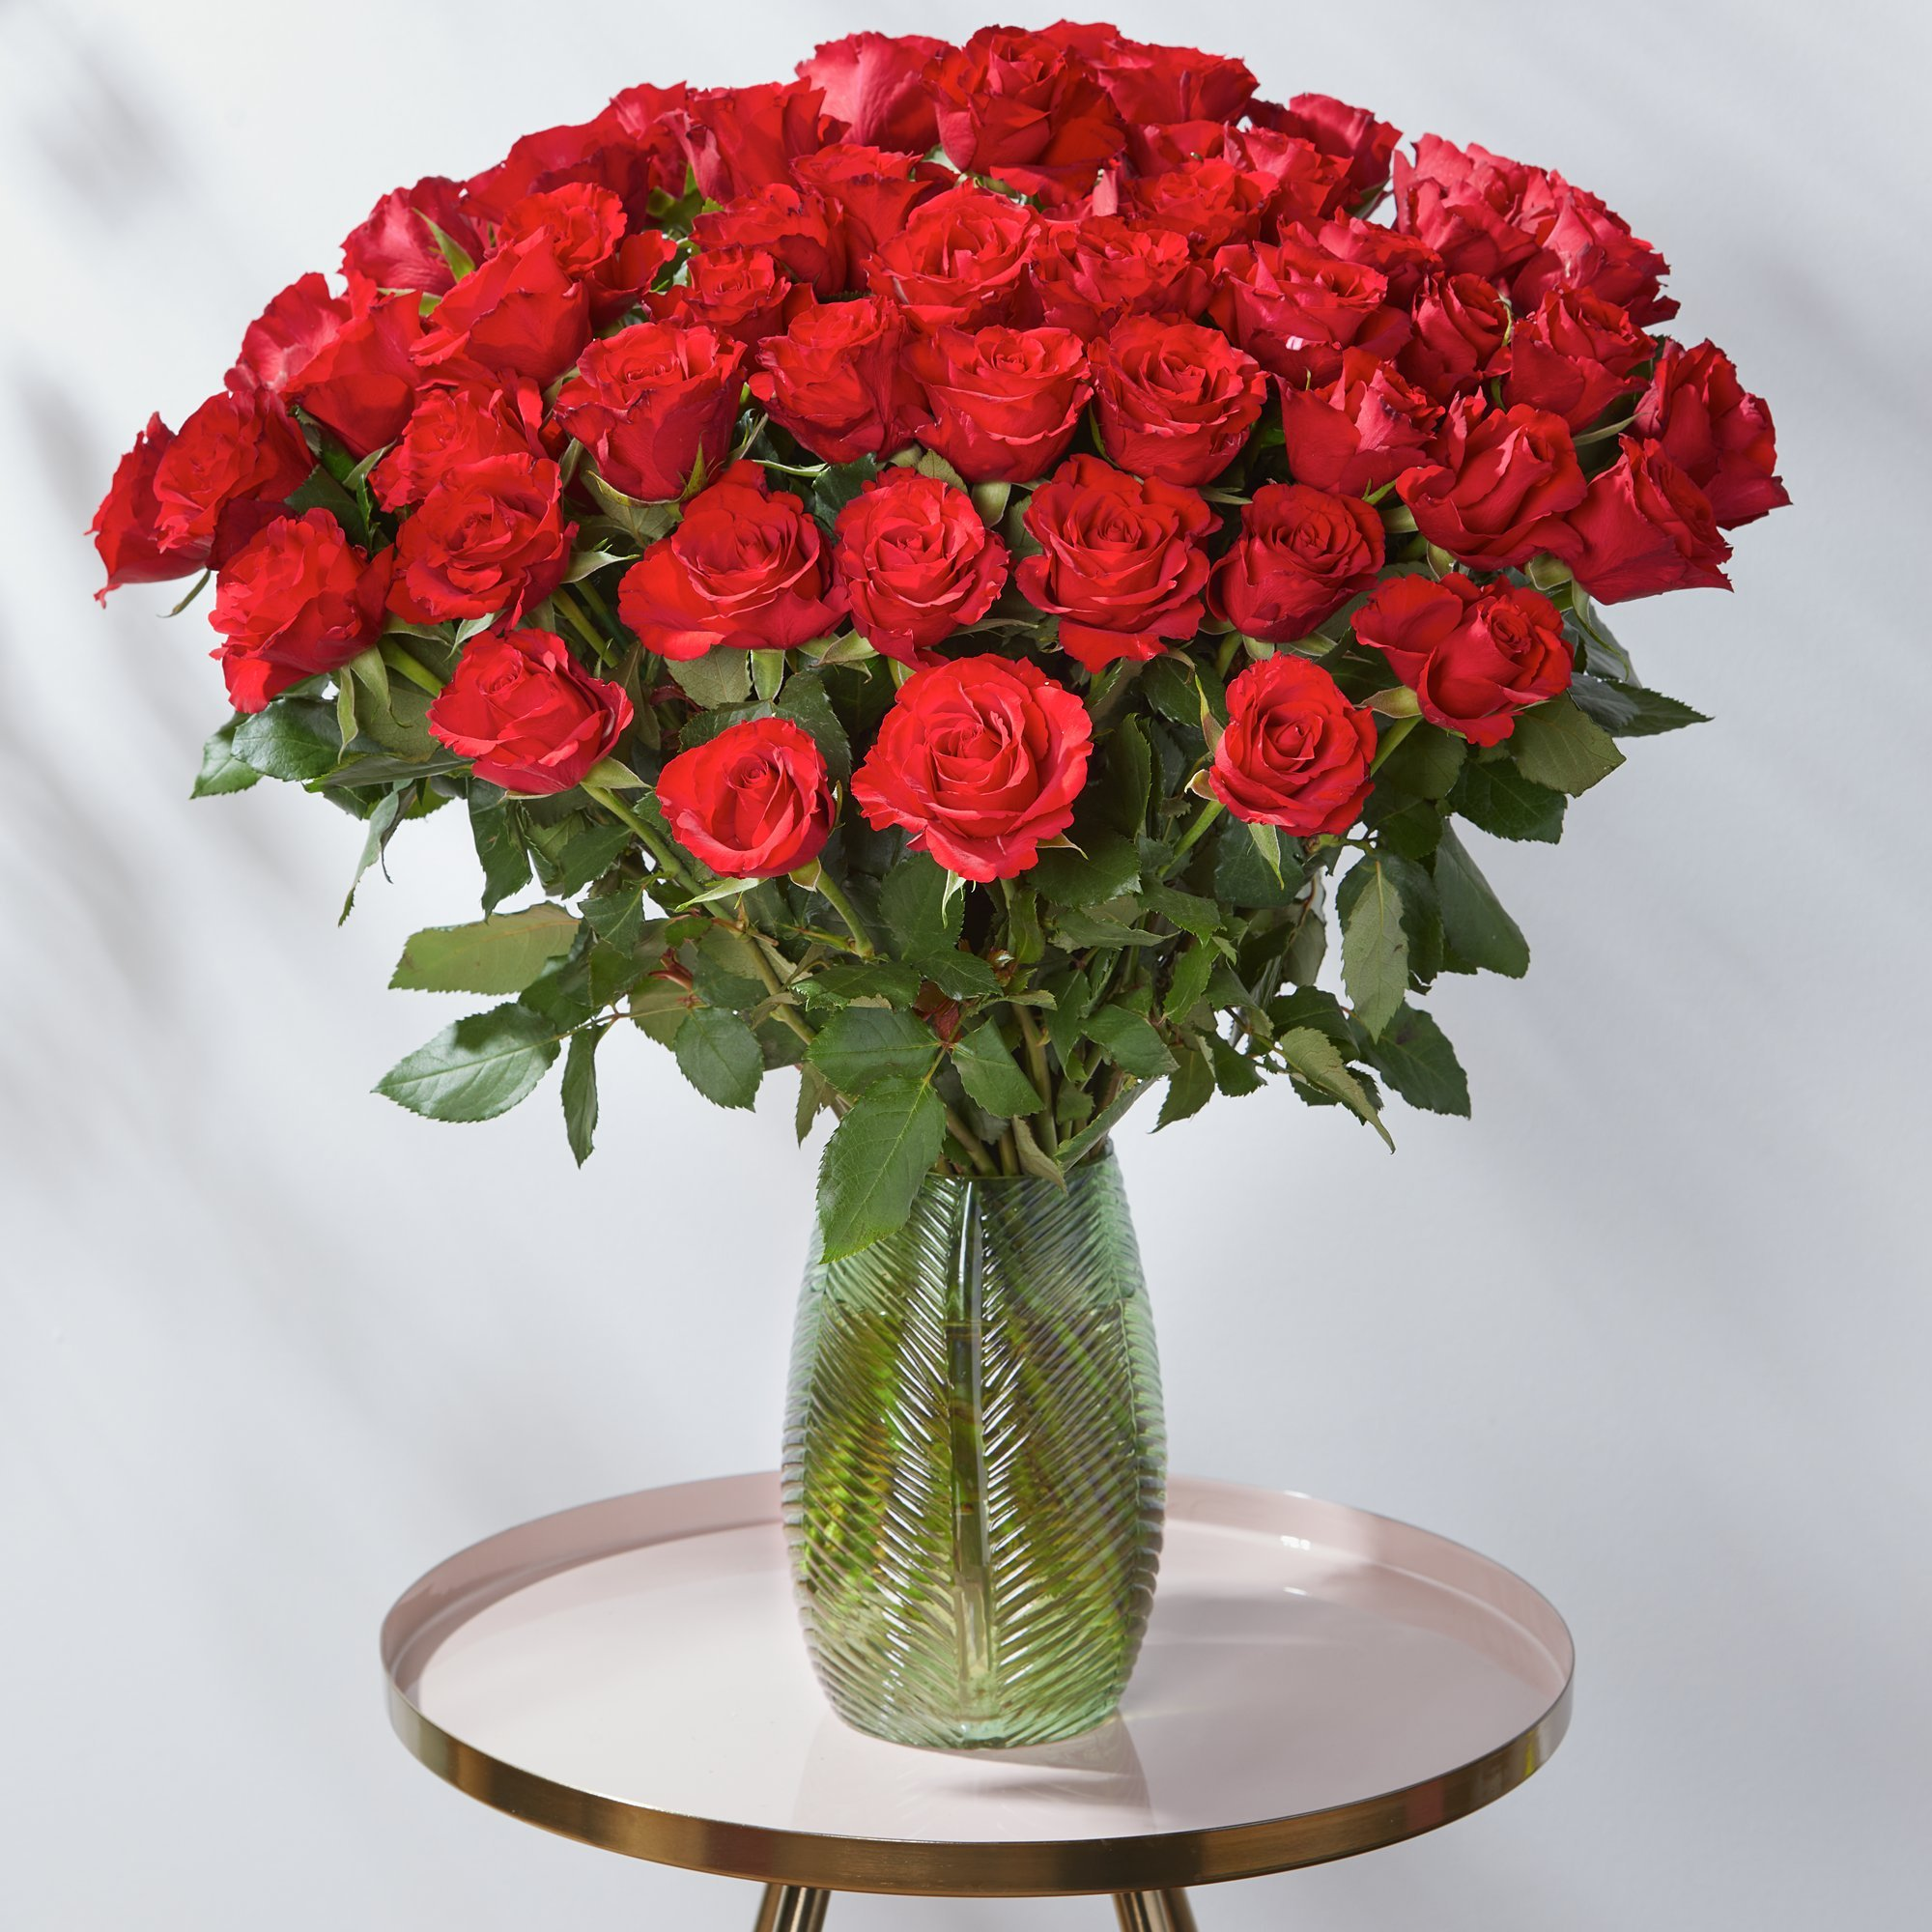 50 Red Roses image